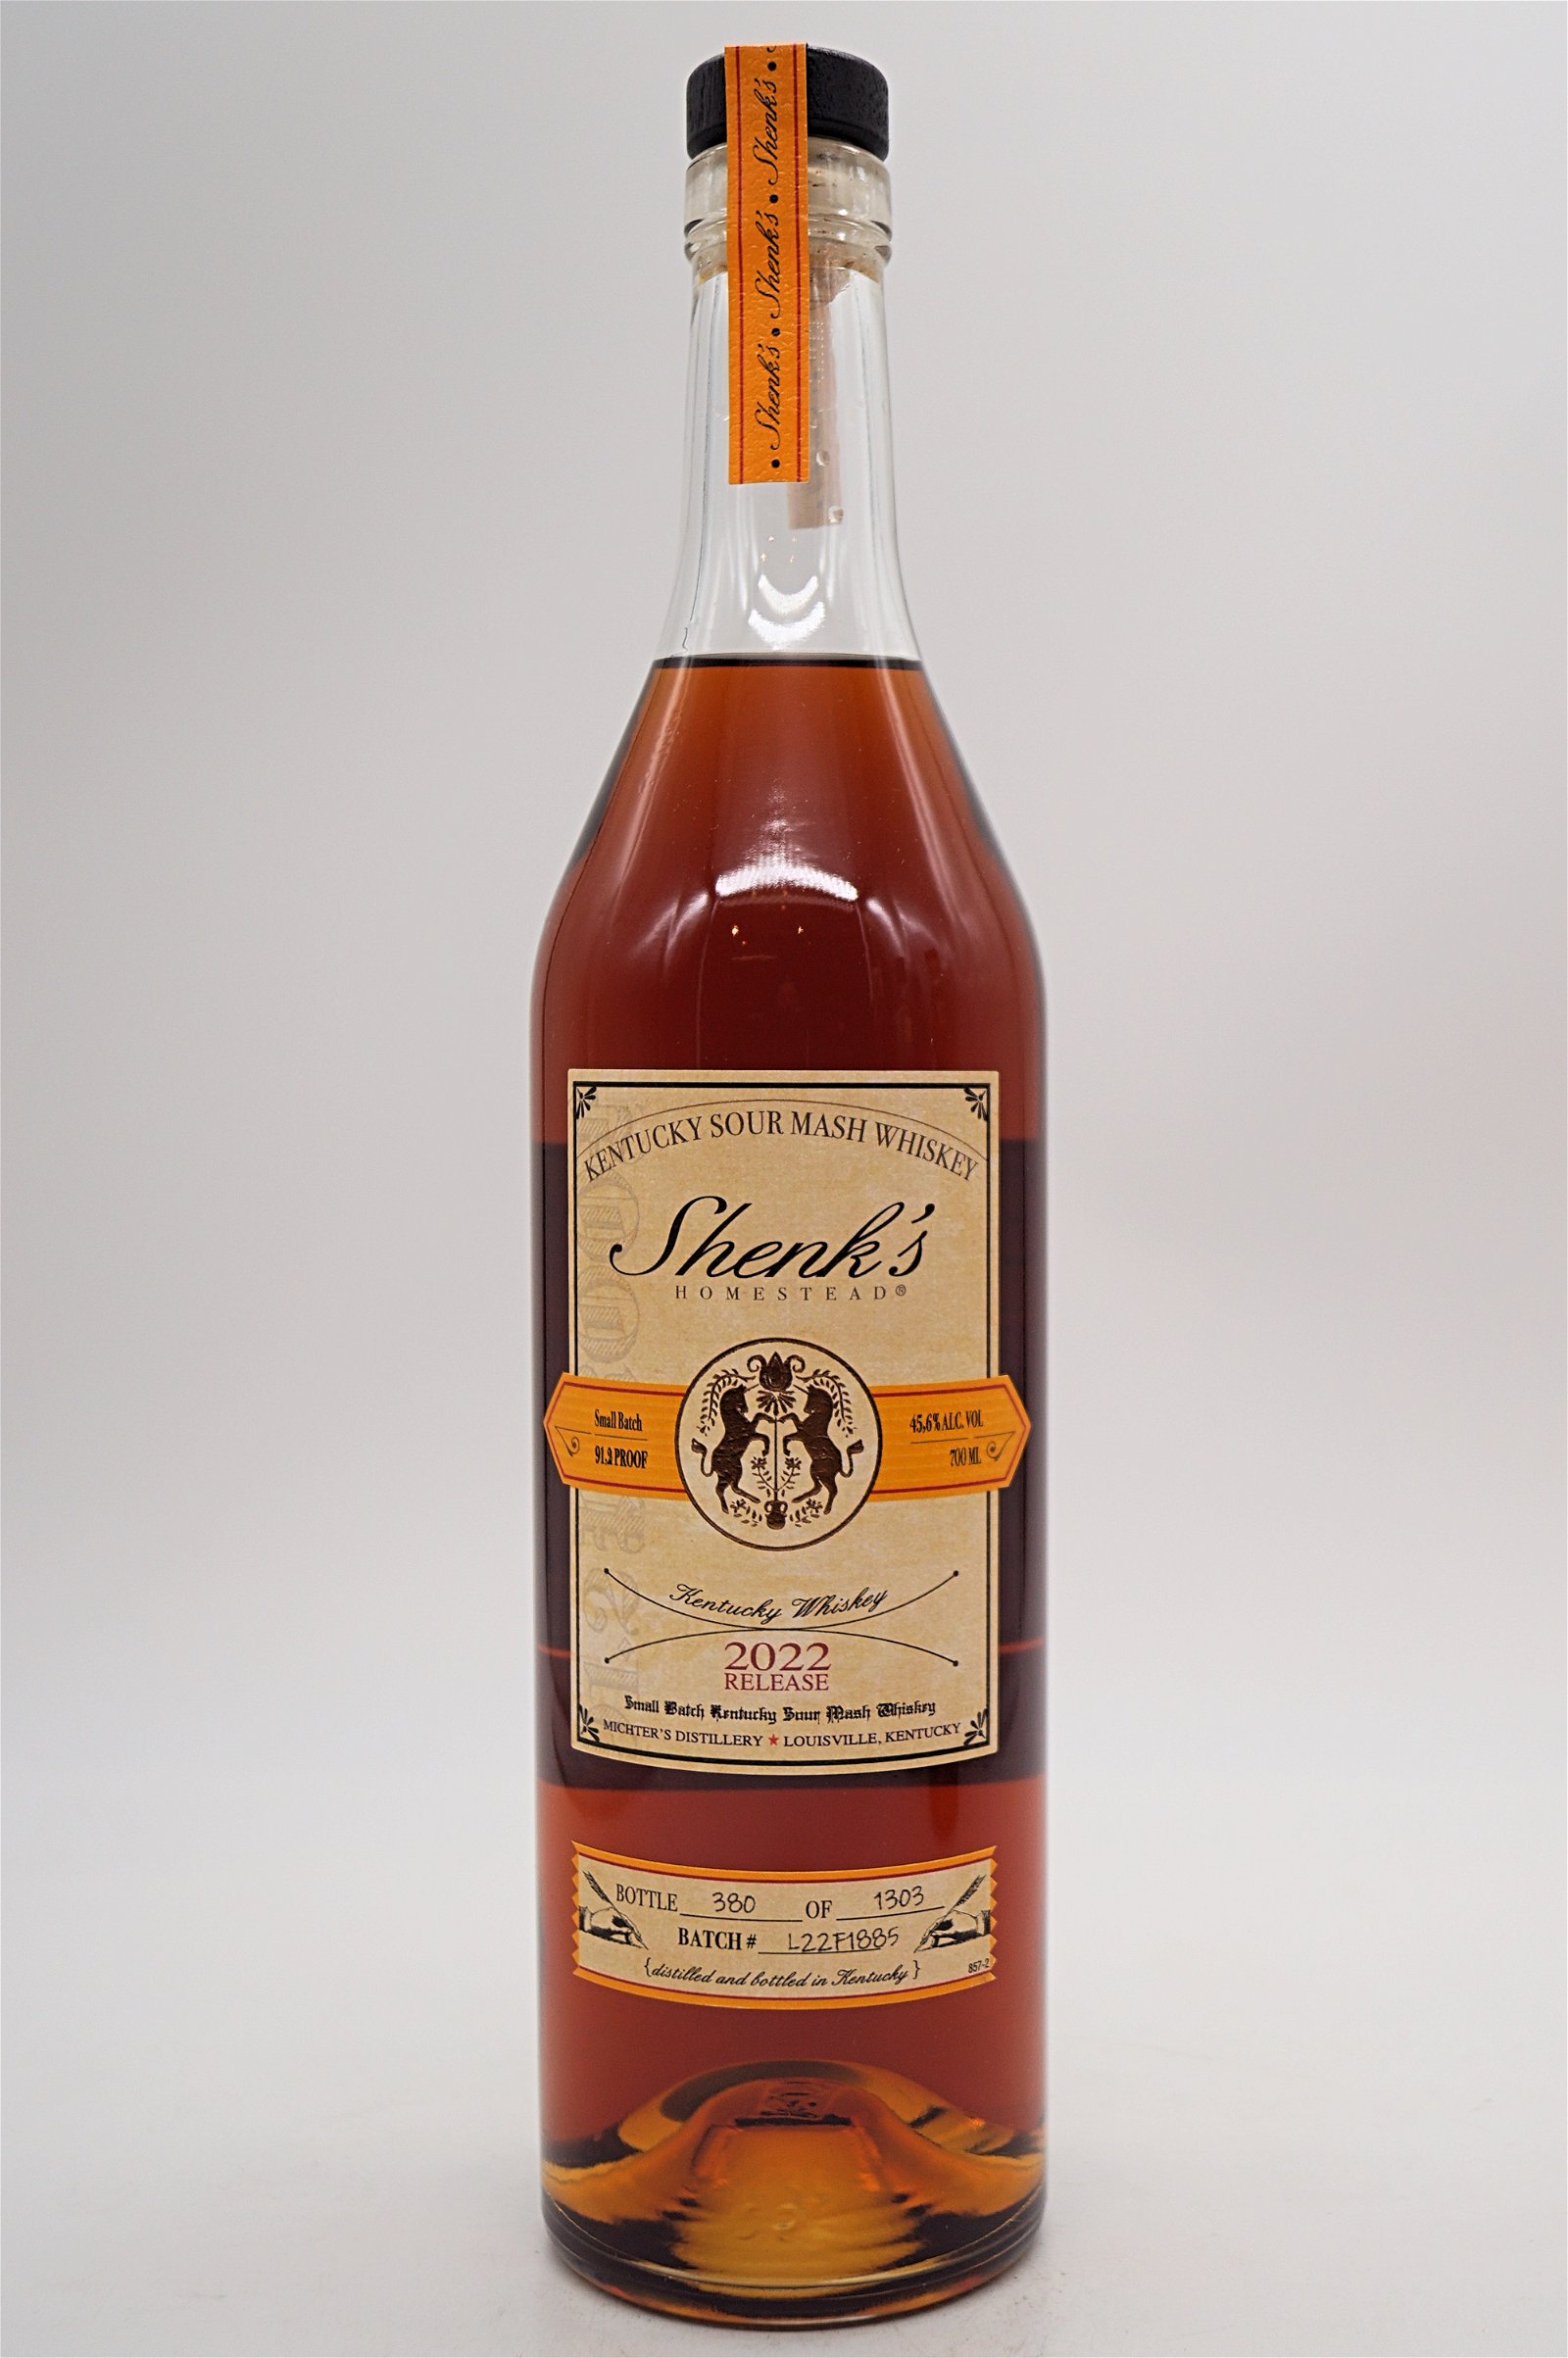 Michters L. R. Shenks Homestead Sour Mash Whiskey